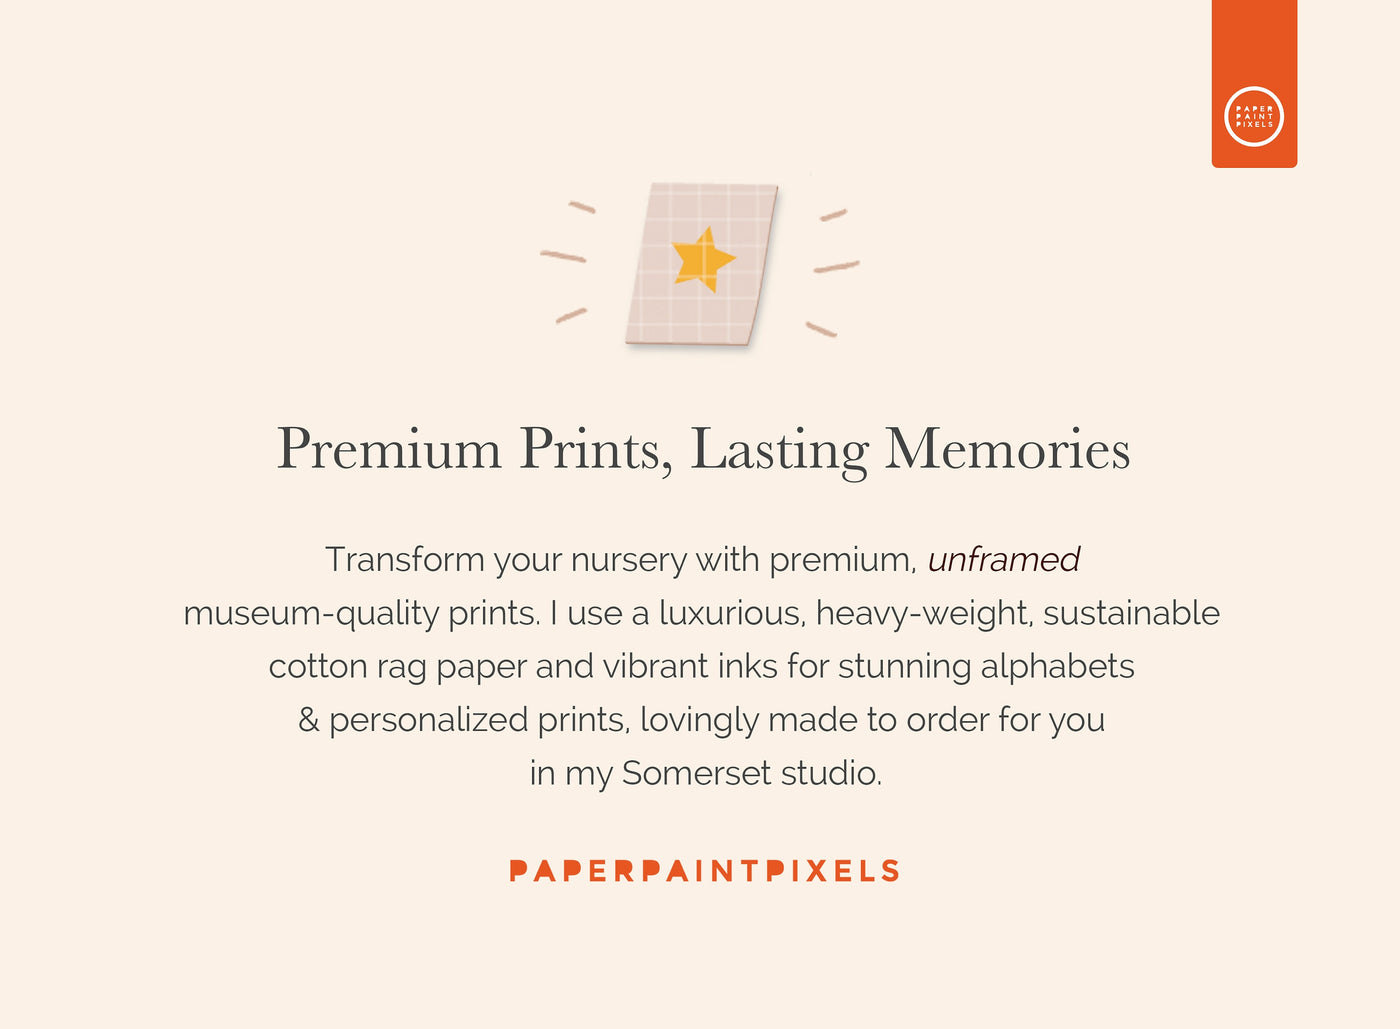 Premium Prints, Lasting Memories promotional poster by PaperPaintPixels with star icon and text highlighting unframed, museum-quality prints and sustainable materials.